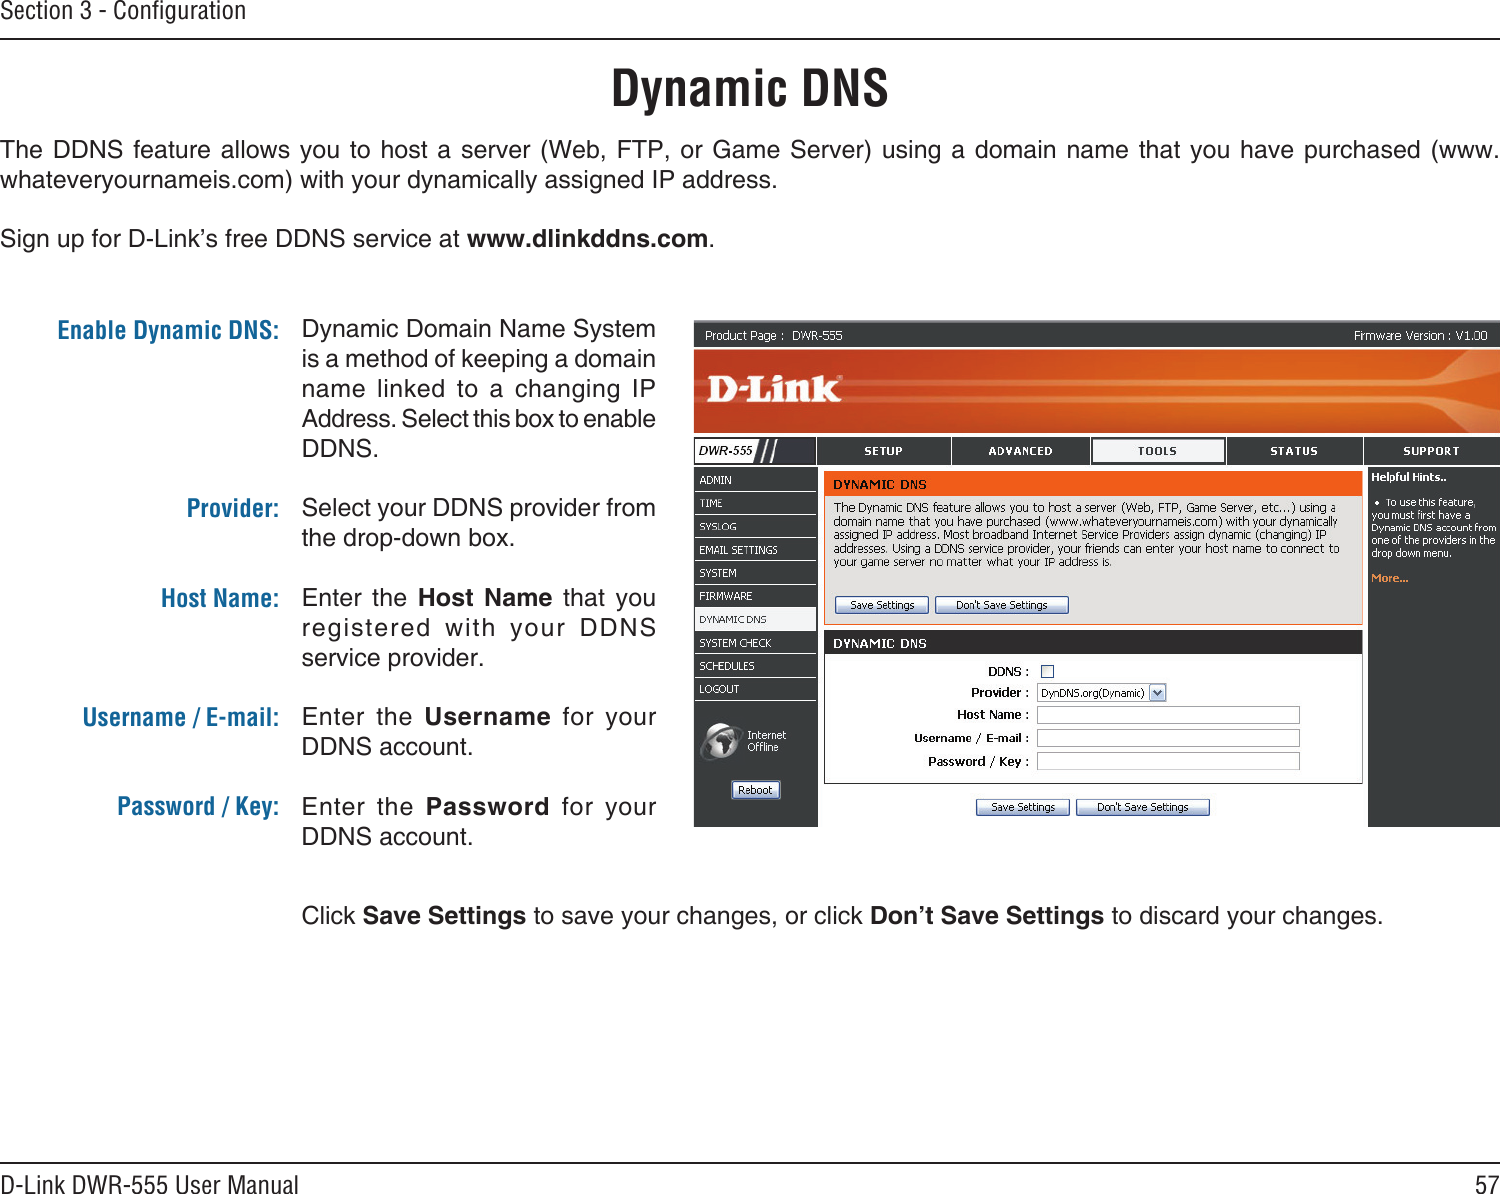 57D-Link DWR-555 User ManualSection 3 - ConﬁgurationDynamic DNSDynamic Domain Name System is a method of keeping a domain name  linked  to  a  changing  IP Address. Select this box to enable DDNS.Select your DDNS provider from the drop-down box.Enter  the  Host  Name  that  you registered  with  your  DDNS service provider.Enter  the  Username  for  your DDNS account.Enter  the  Password  for  your DDNS account.The DDNS  feature  allows you to host  a  server  (Web, FTP, or Game  Server)  using a domain name  that  you have purchased (www.whateveryournameis.com) with your dynamically assigned IP address.Sign up for D-Link’s free DDNS service at www.dlinkddns.com.Enable Dynamic DNS:Provider: Host Name:Username / E-mail: Password / Key:Click Save Settings to save your changes, or click Don’t Save Settings to discard your changes.